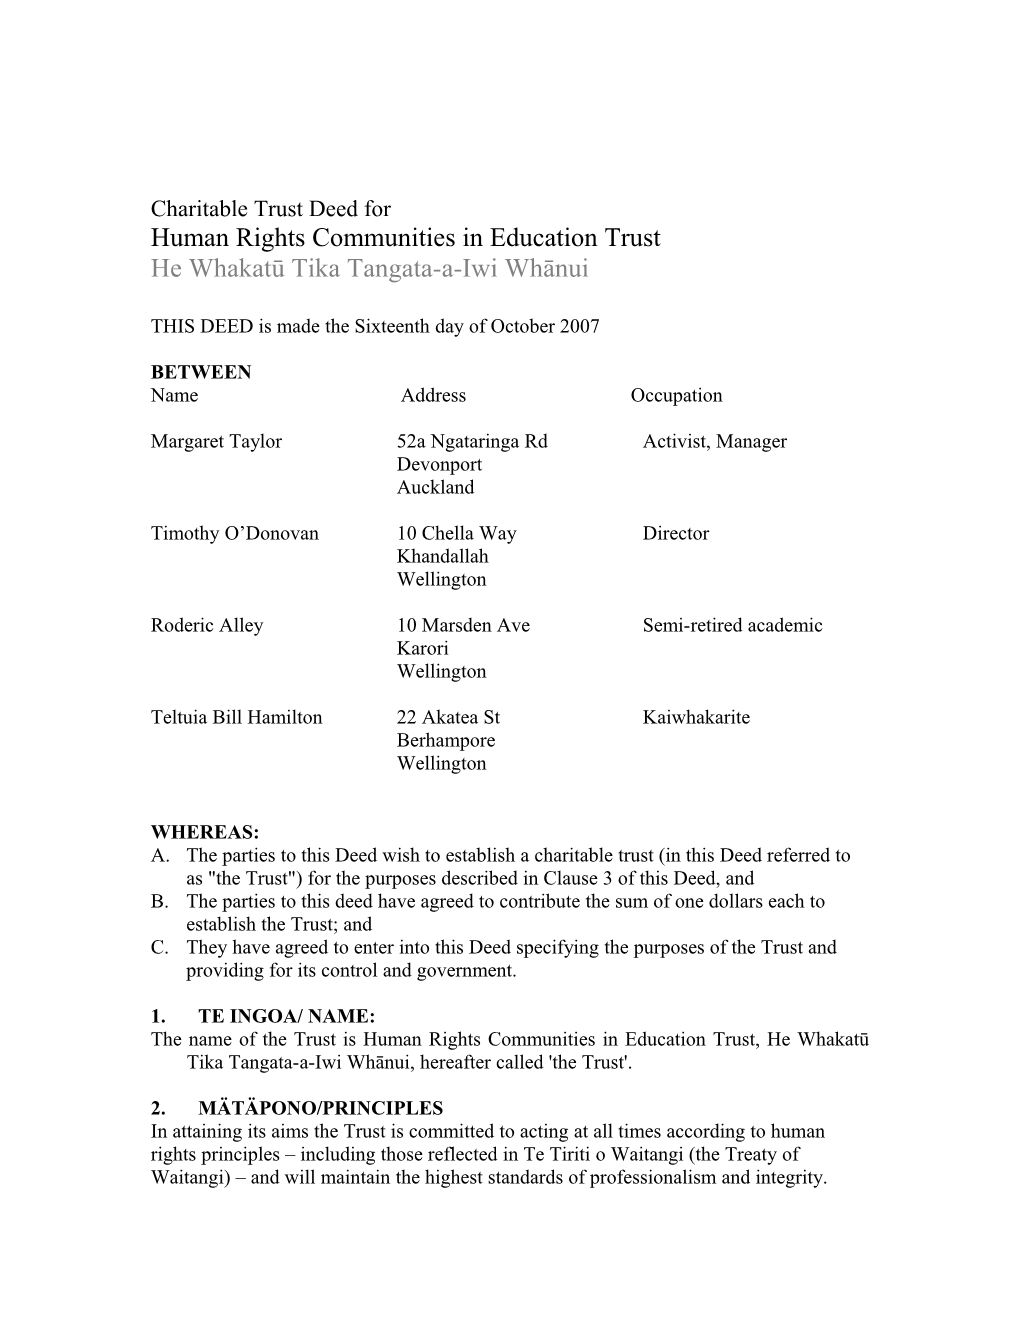 Sample Charitable Trust Deed and Guide to Its Clauses